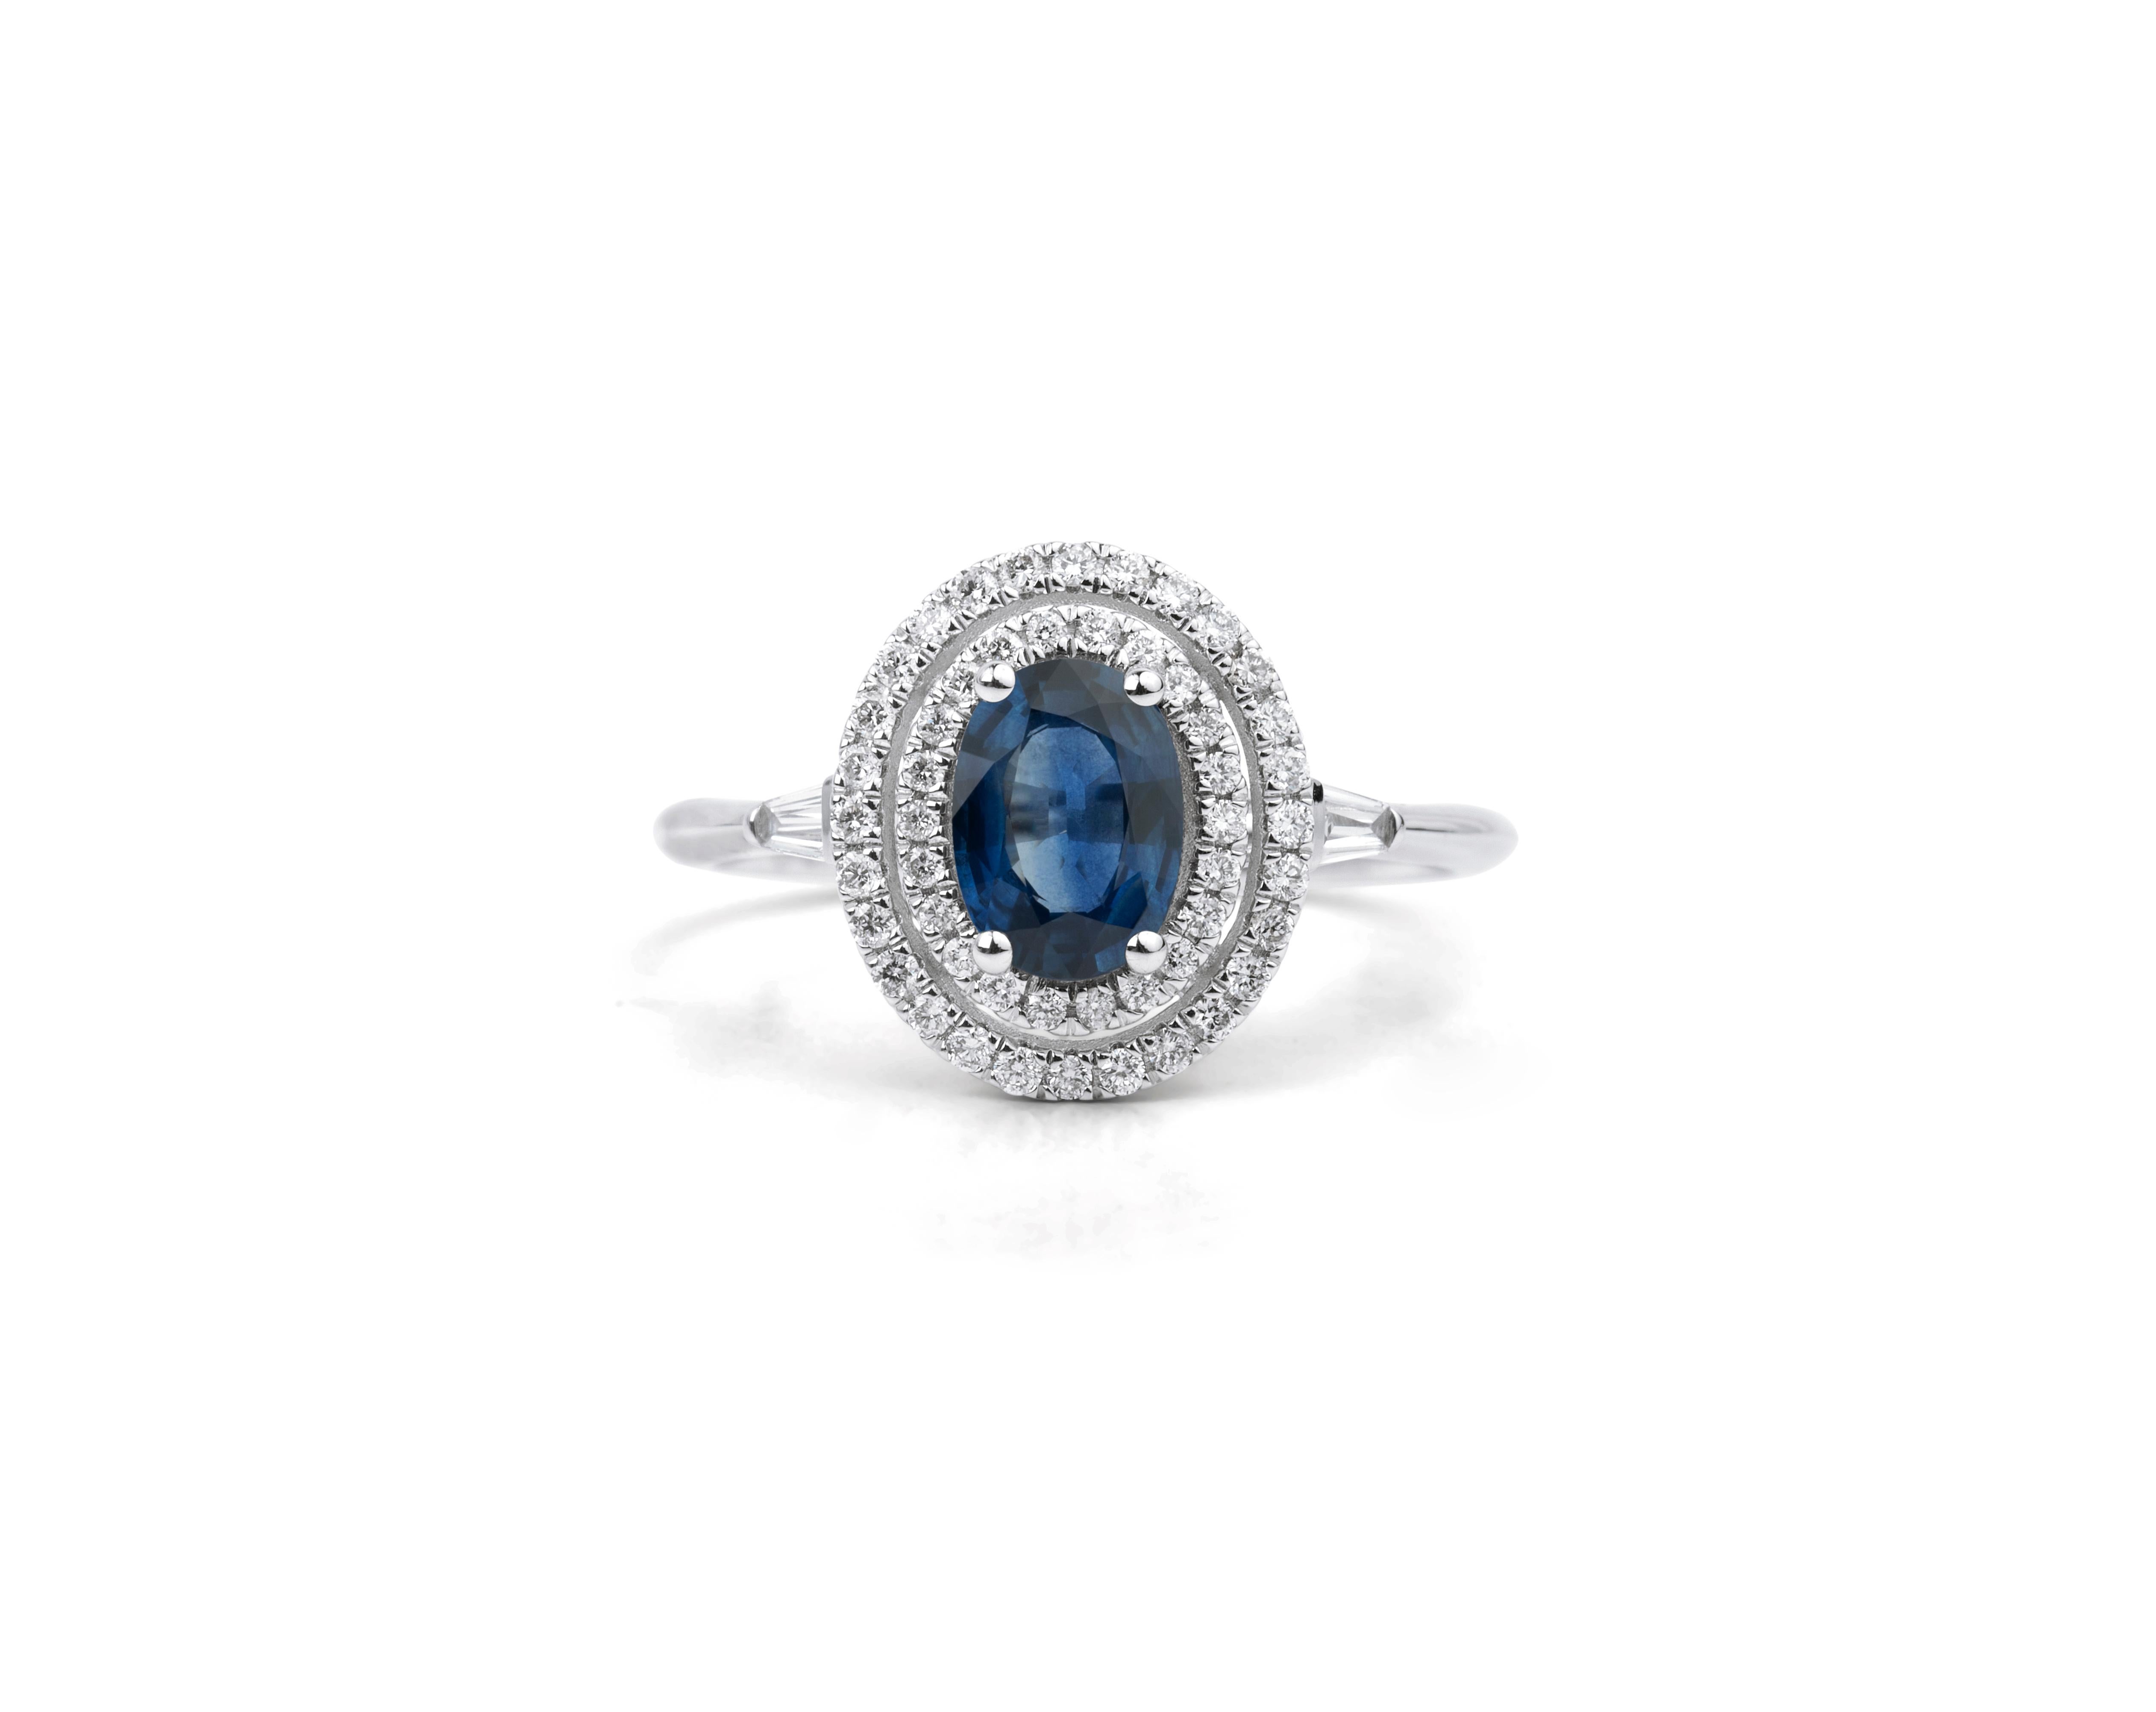 Oval Blue Sapphire Diamond Baguette Round Cut Double Halo Cocktail Ring

Available in 18k white gold.

Same design can be made also with other custom gemstones per request.

Product details:

- Solid gold

- Diamond - approx. 0.29 carat

- Sapphire